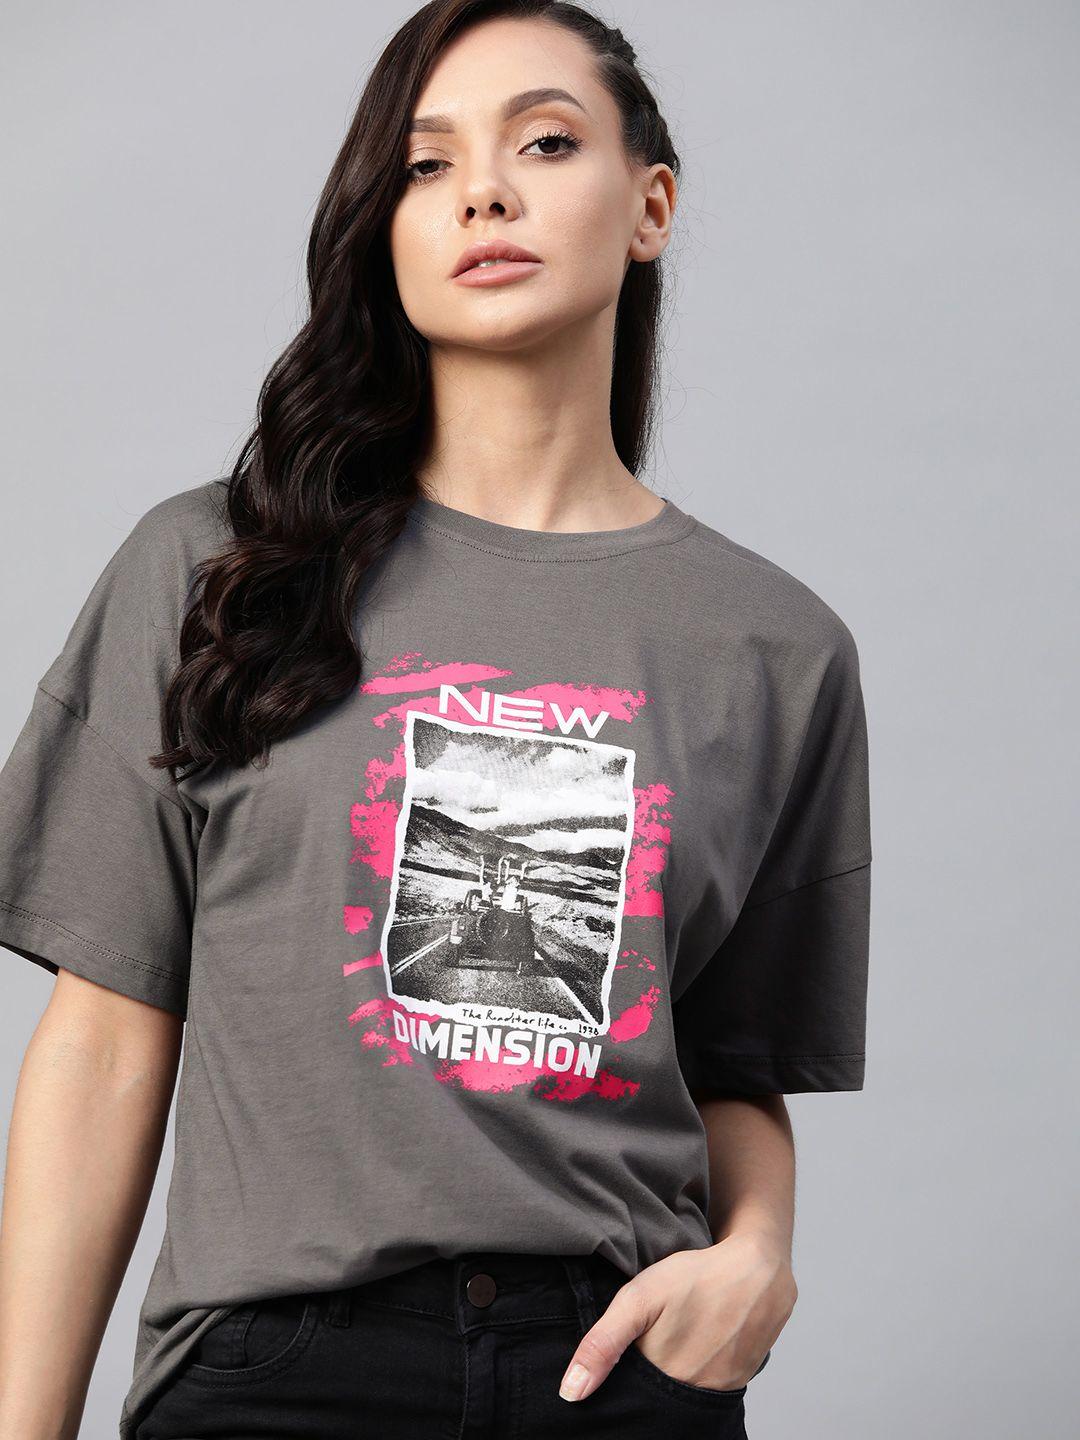 the roadster lifestyle co women charcoal grey & white cotton graphic print drop-shoulder sleeves t-shirt